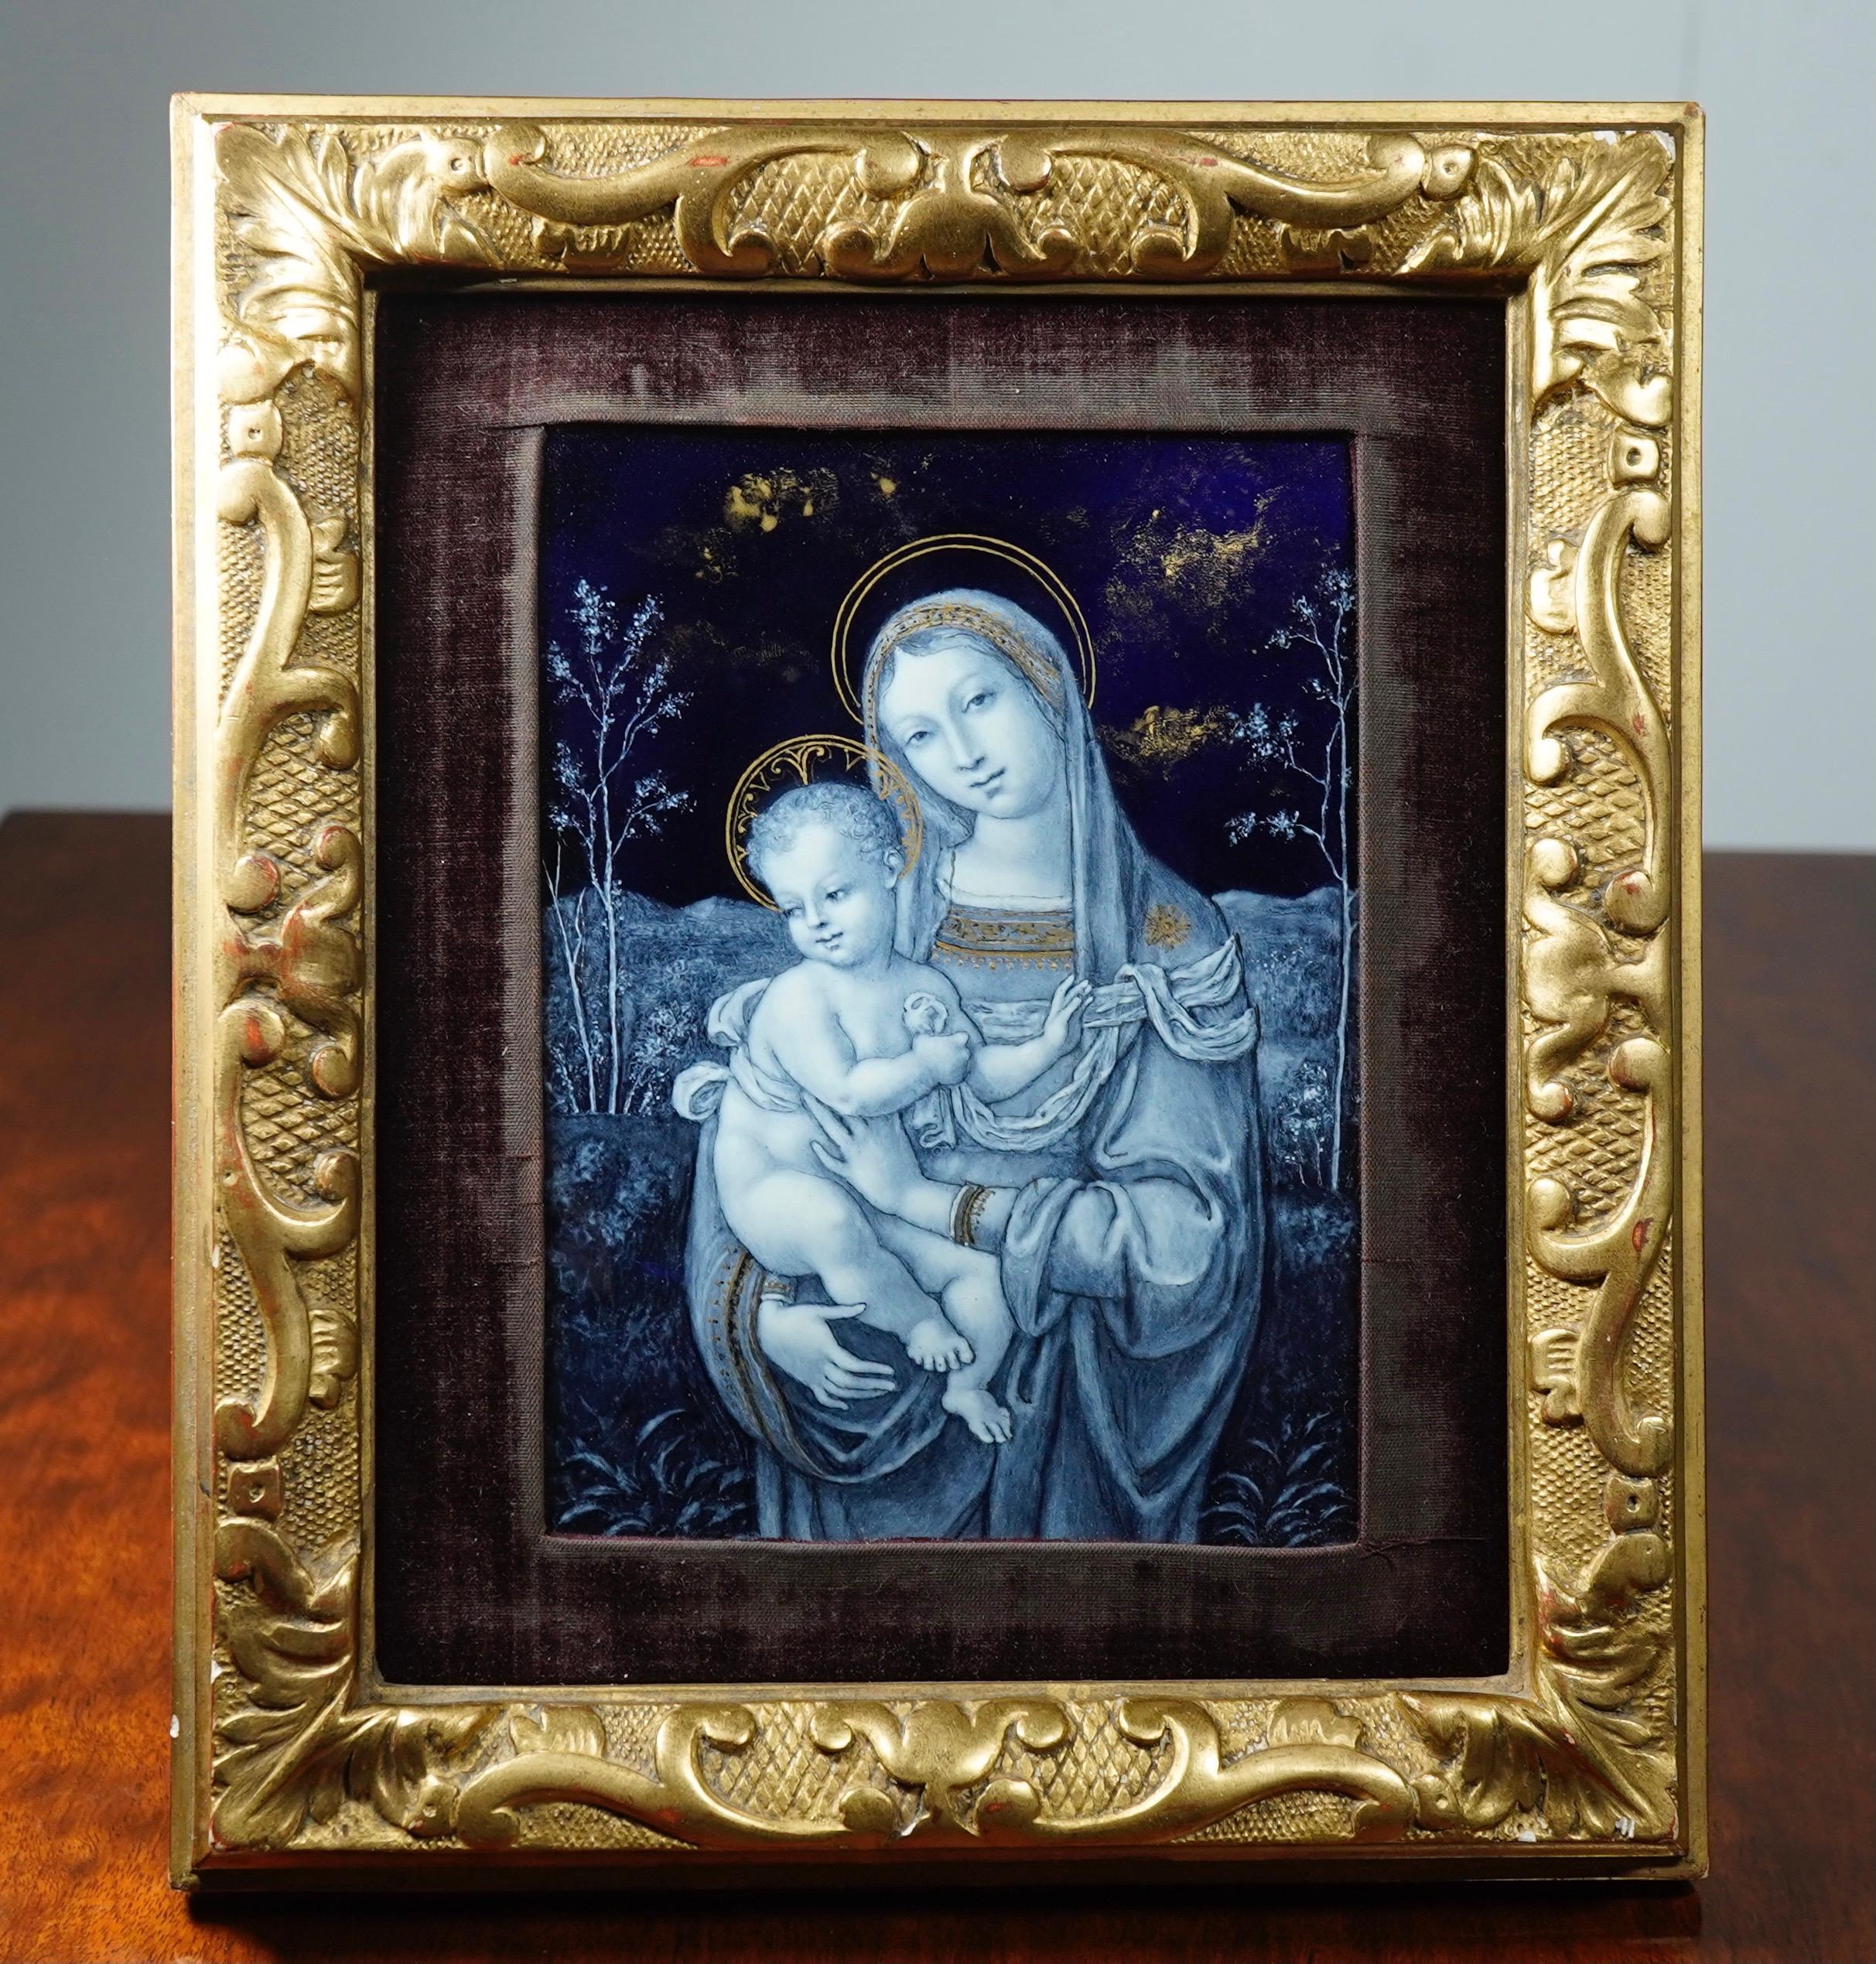 Superb French enamel plaque, painted in white enamel over a deep blue ground with a Renaissance style Madonna and Child, each outlined in halos of gold, the background wooded landscape with gilt clouds above, set in a carved giltwood frame with